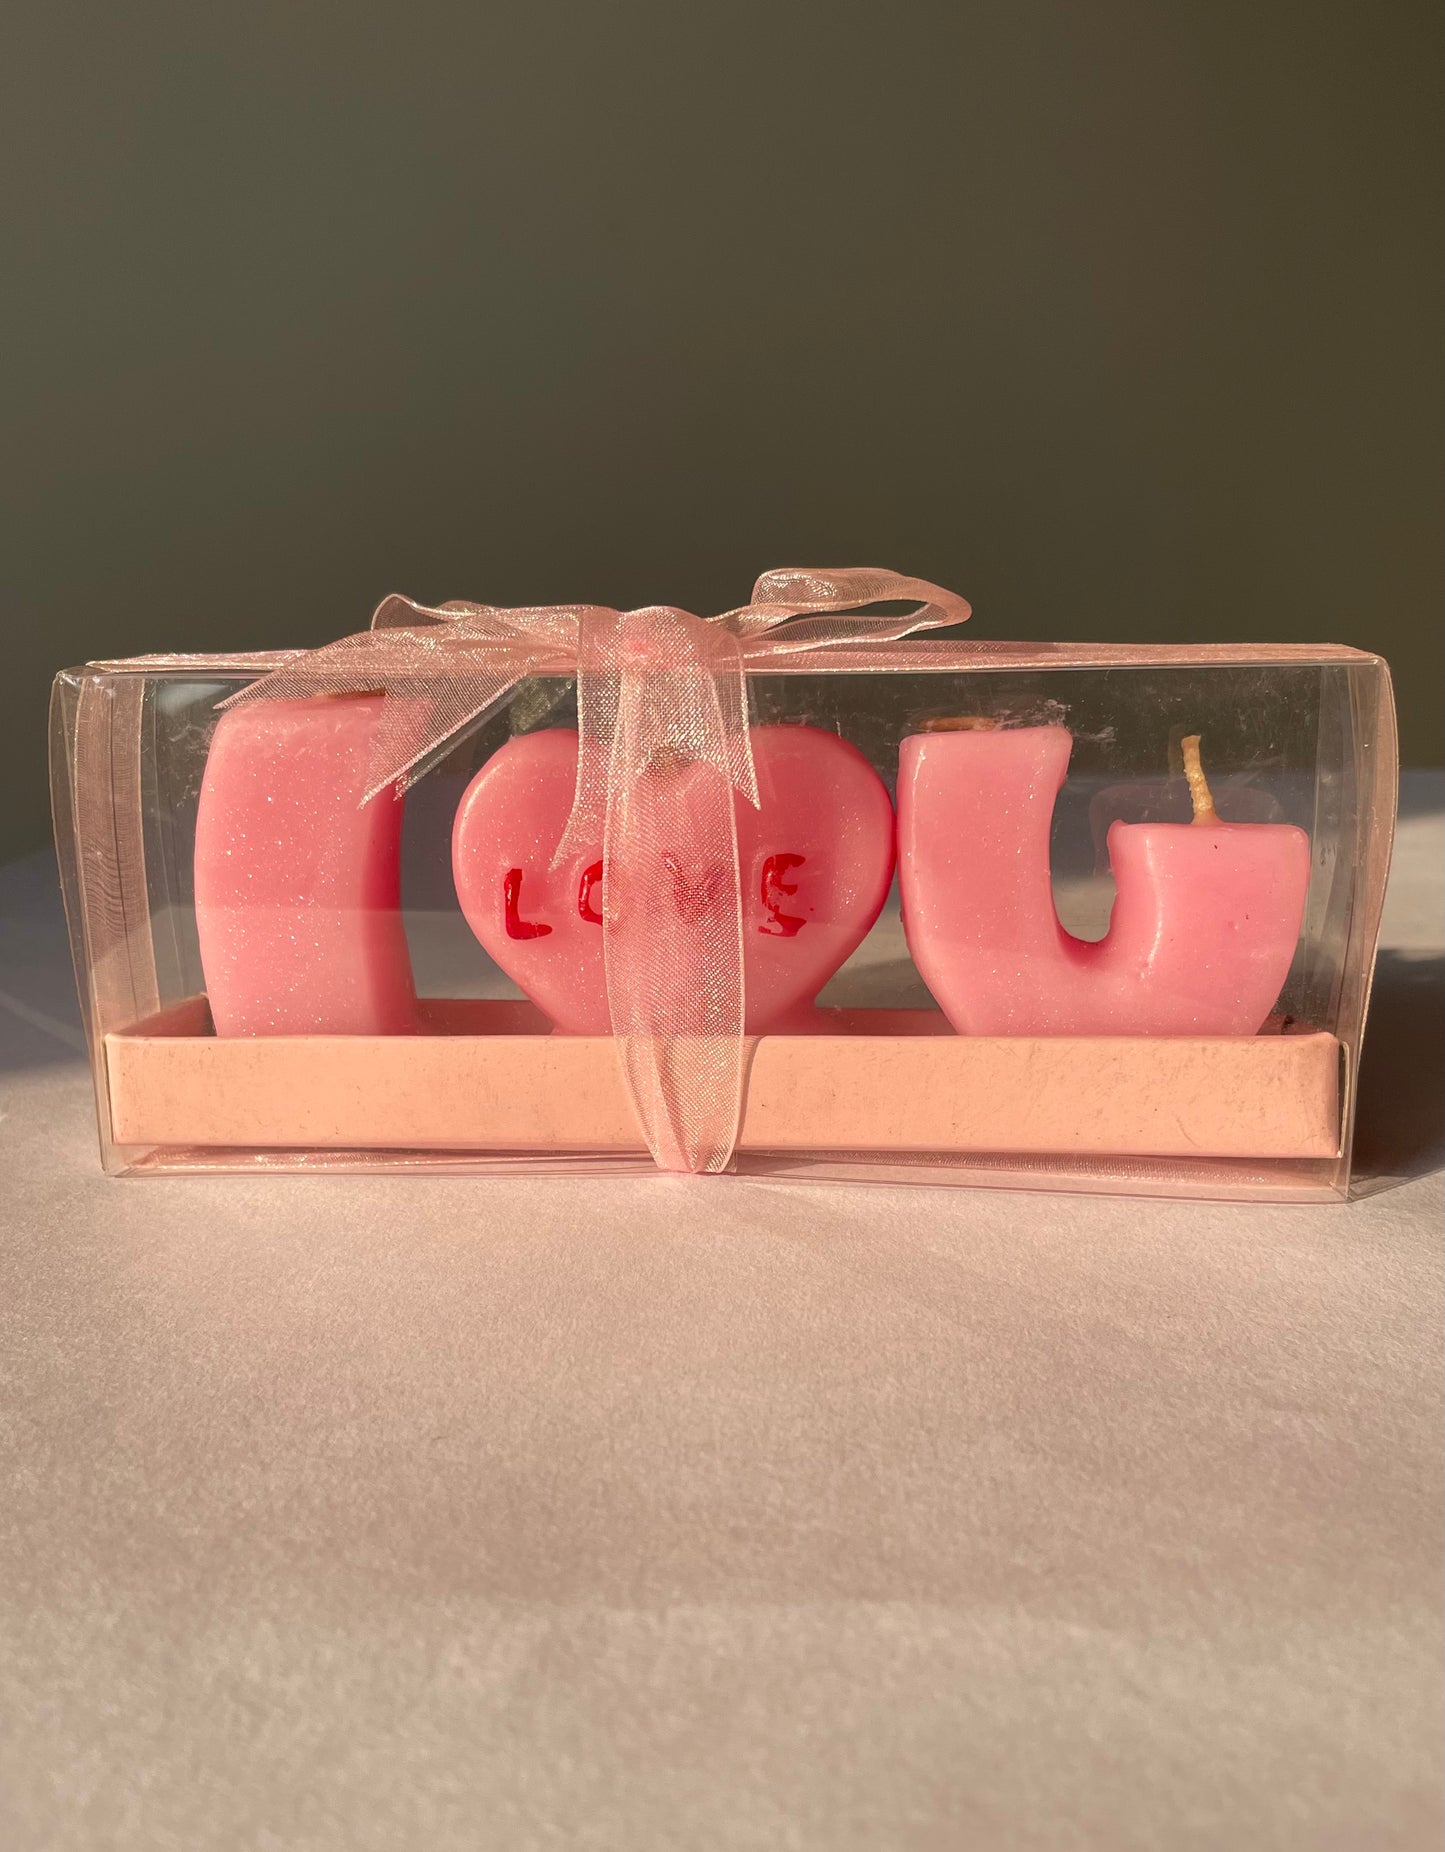 With our 'I Love U' candle from our couples gift set, you may celebrate love and togetherness and cherish your bond.